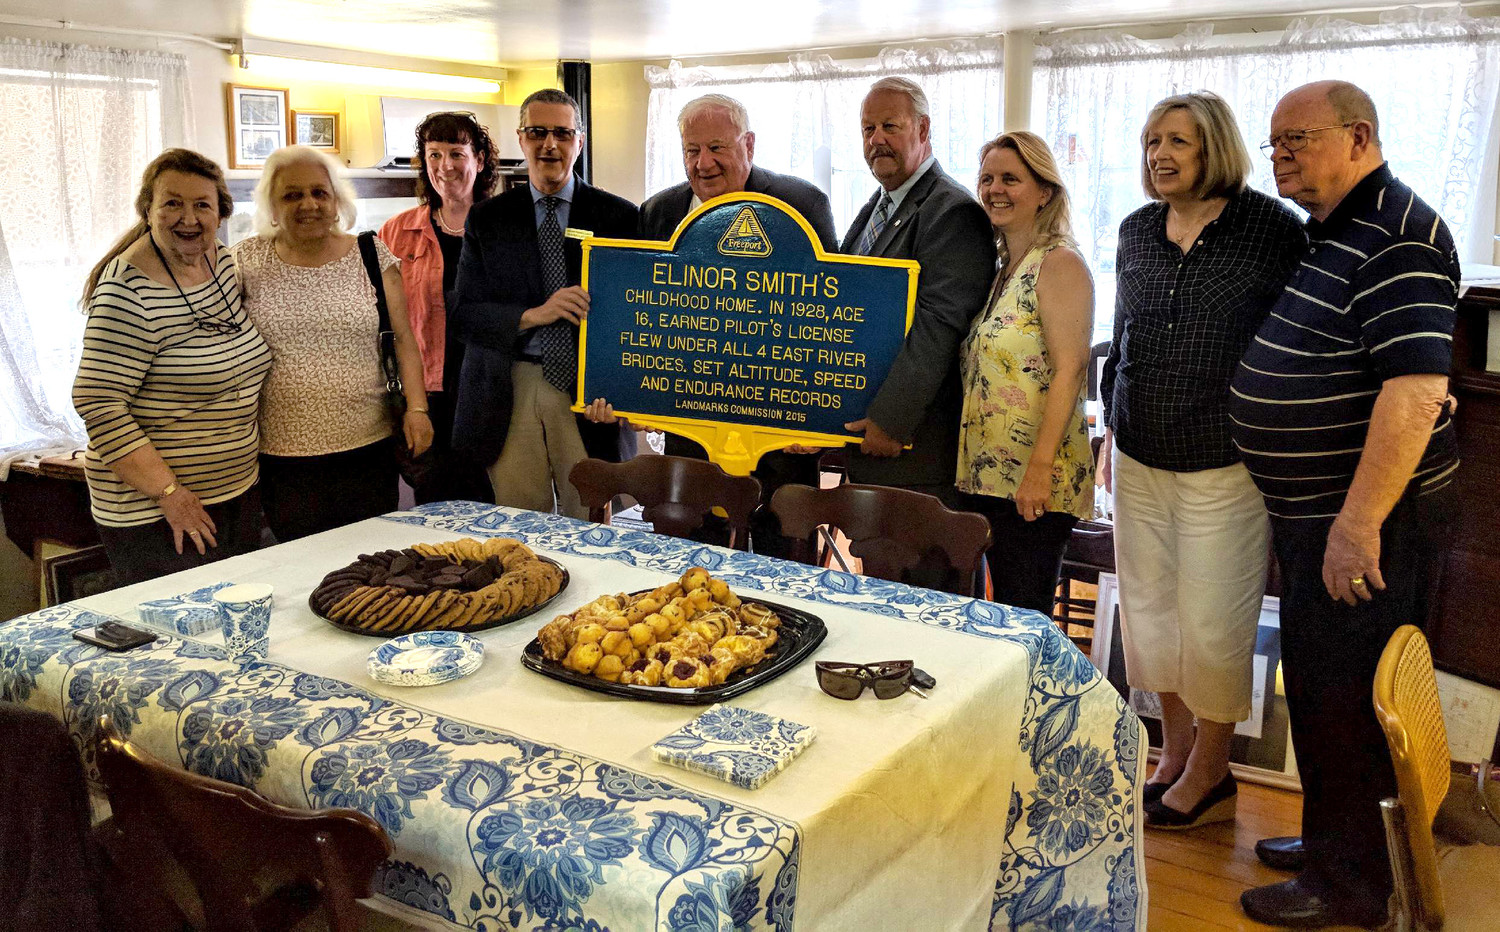 The Freeport Historical Society held a ceremony to honor Elinor Smith for her contributions to aviation on July 20, and welcomed Smith’s family, along with elected officials from the village, county and state.